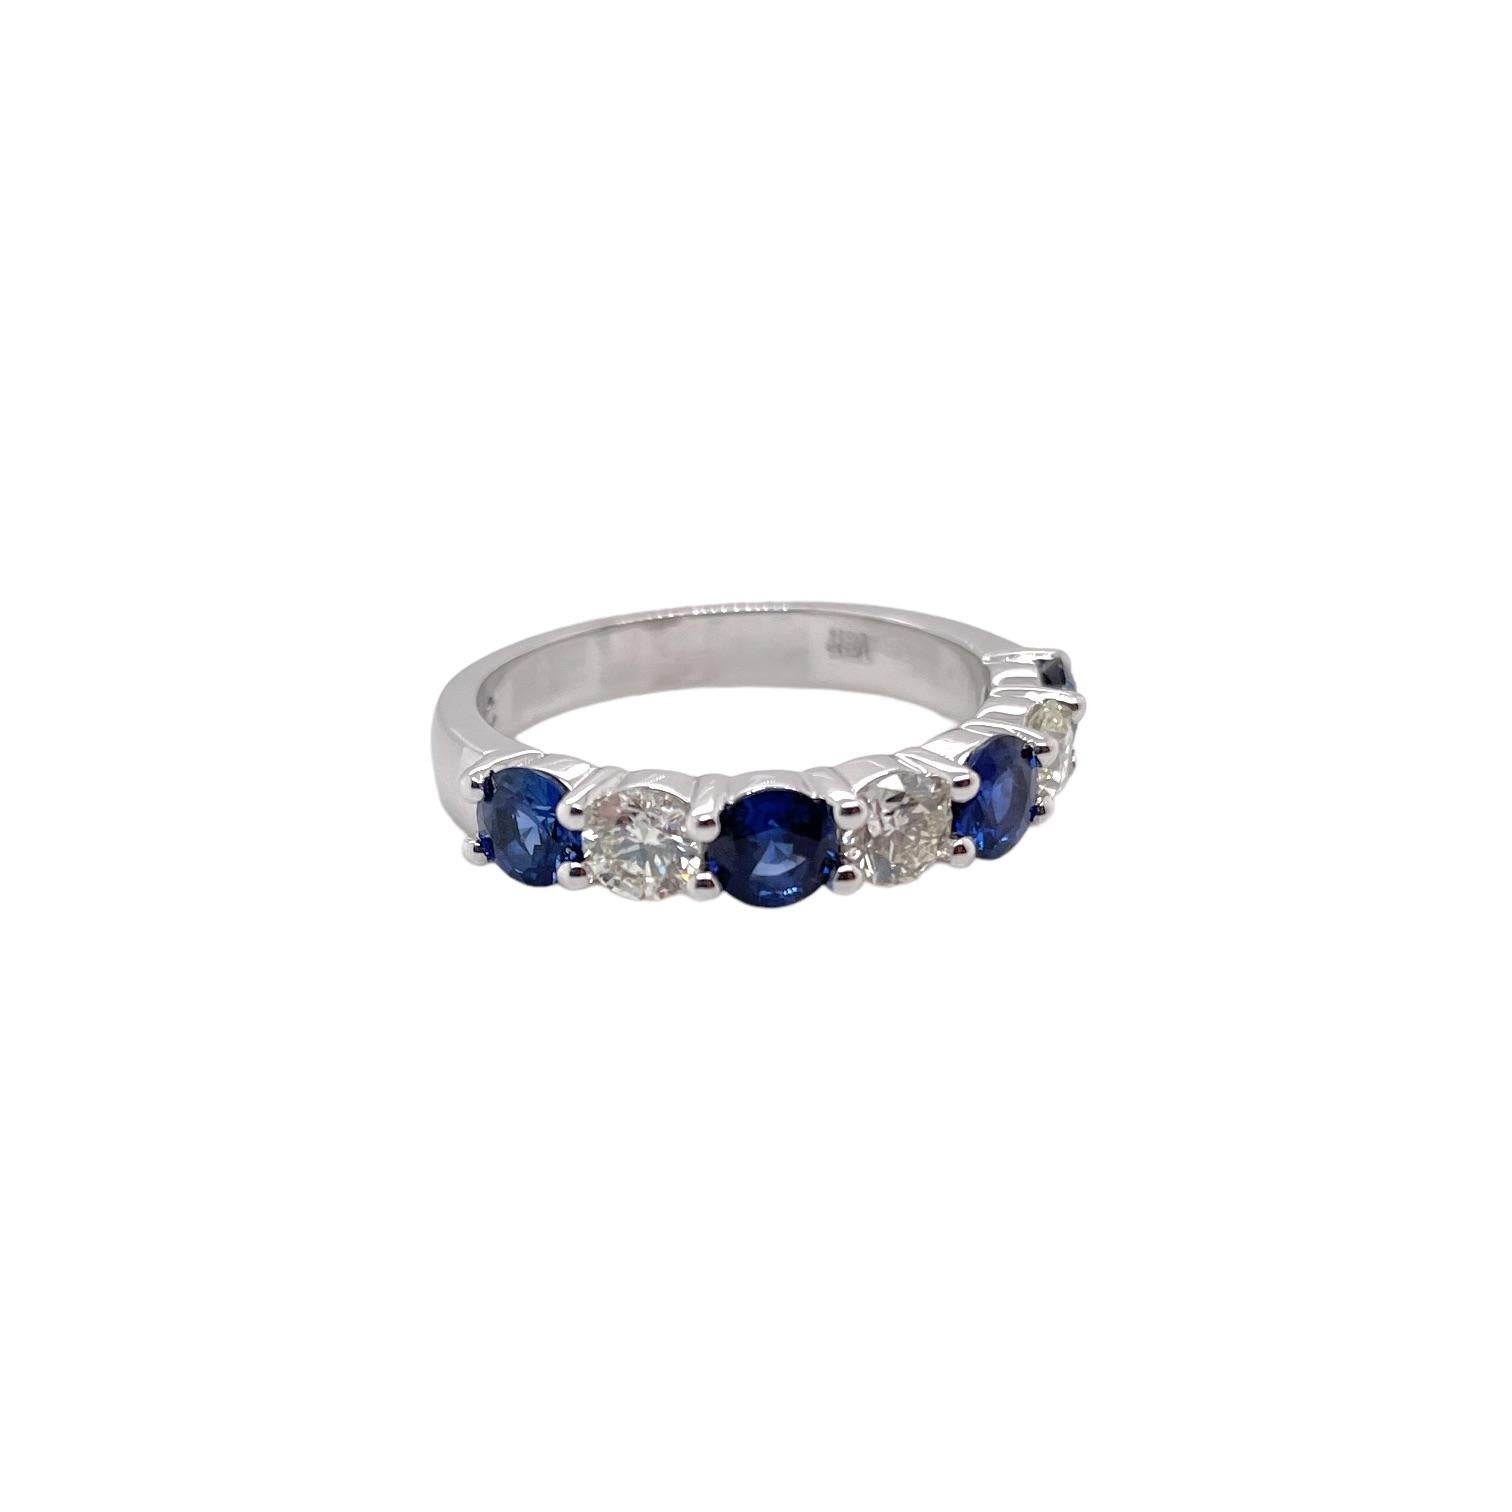 Ring contains 4 alternating round brilliant sapphires, 1.15tcw and 3 round brilliant diamonds, 0.63tcw. Diamonds are near colorless and VS2 in clarity, excellent cut. All stones are mounted in a basket prong setting. Ring is a size 6.75 and can be